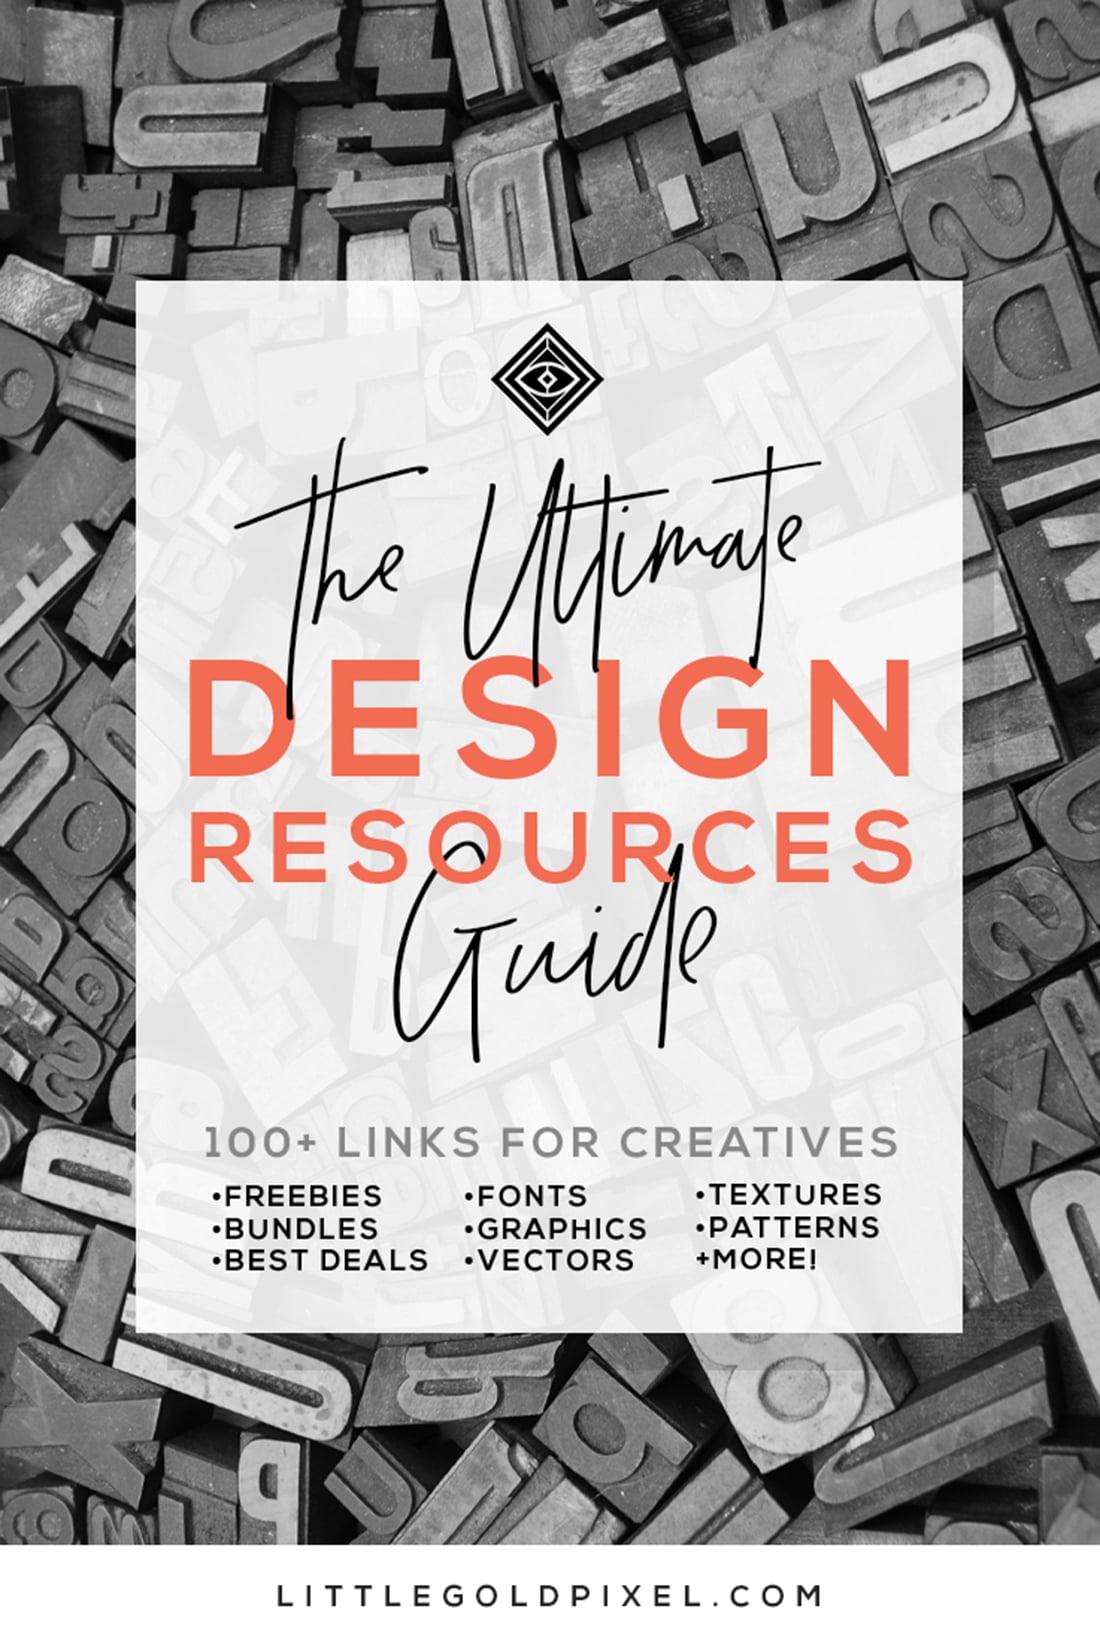 Ultimate Design Resources Guide • 100+ Links for Digital Creatives who Photoshop, Illustrator • Freebies, Bundles & Deals on Fonts, Graphics, Vectors, Textures, Patterns & More! • Click through & bookmark today!